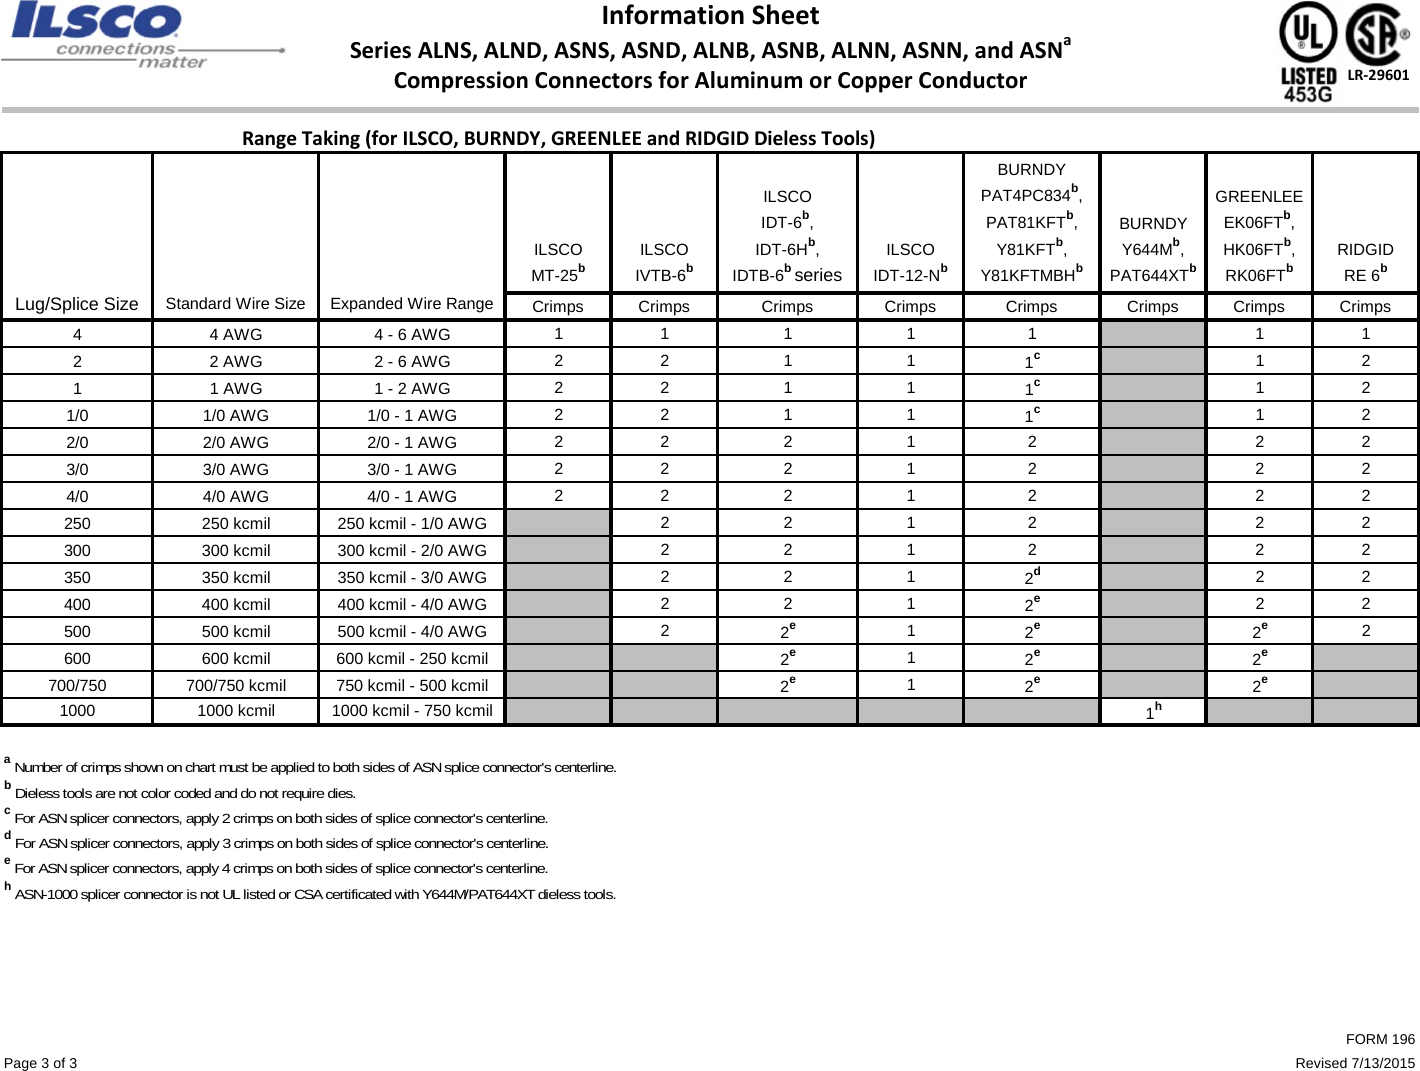 Page 3 of 9 - FORM 196 ALN, ASN COMPRESSION 7-13-2015x  Brochure